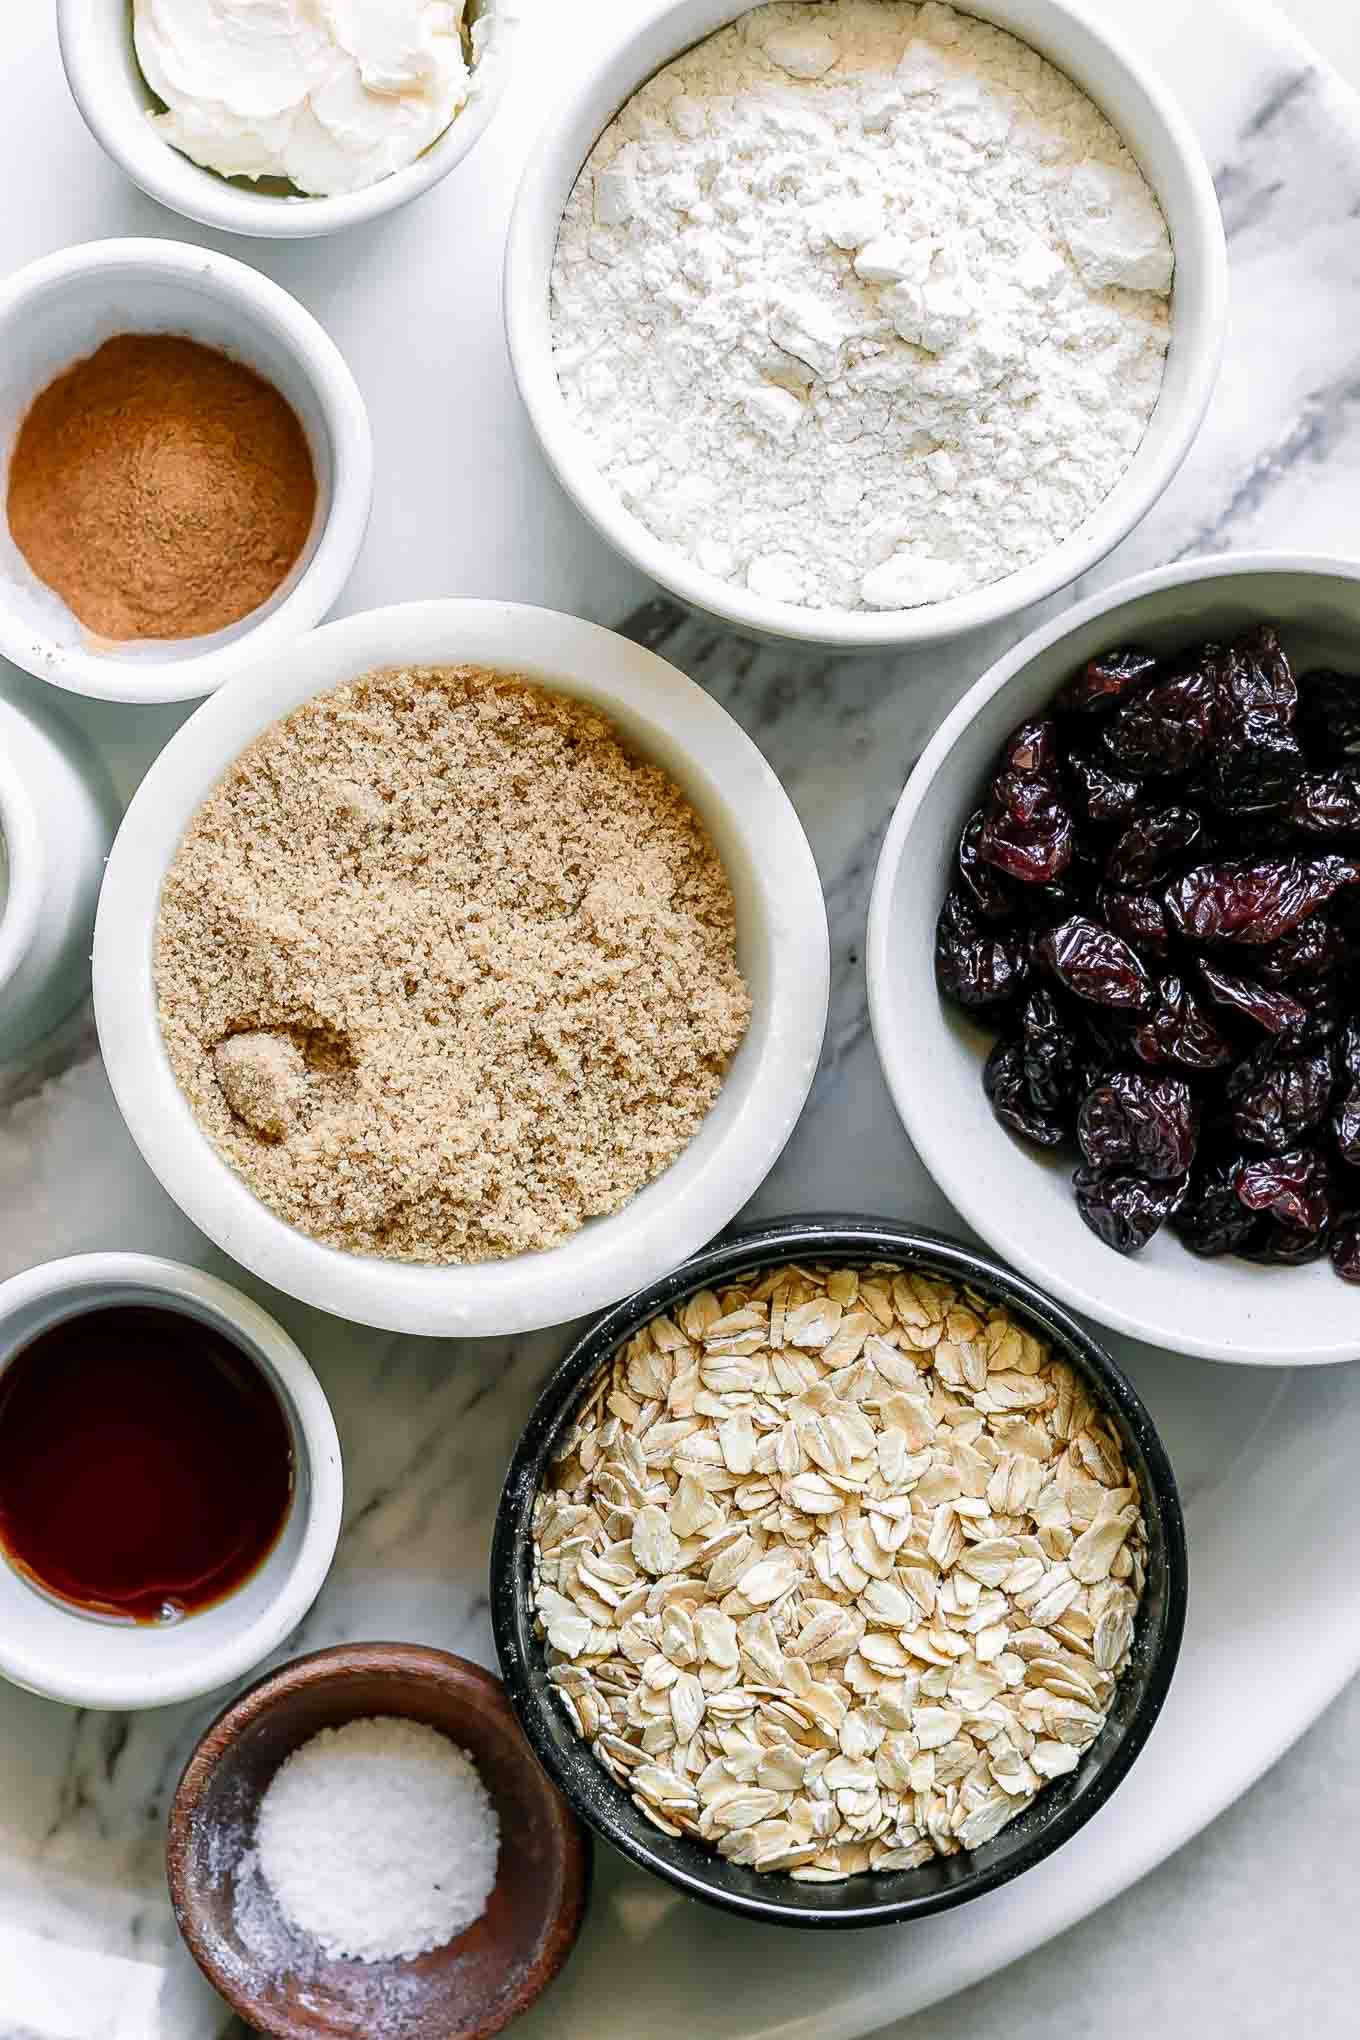 bowls of oatmeal, flour, brown sugar, dried cherries, and other ingredients for cookies